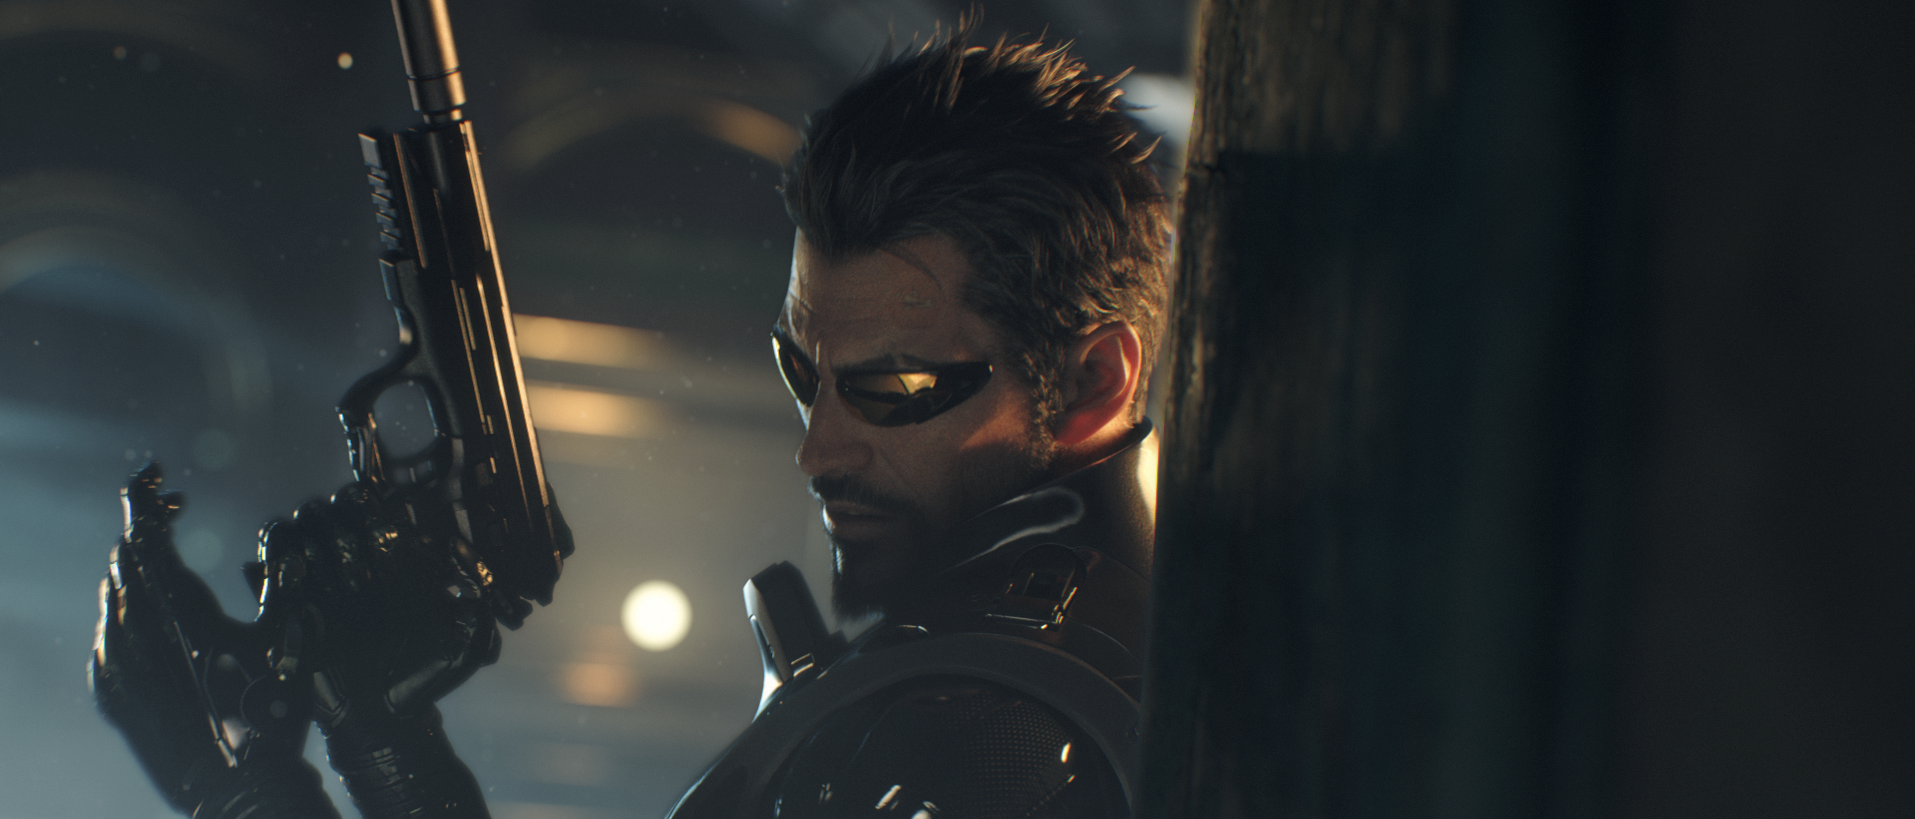 Deus Ex Mankind Divided Screenshot Showing the Main Character with His Back to a Wall Holding Up his Handgun